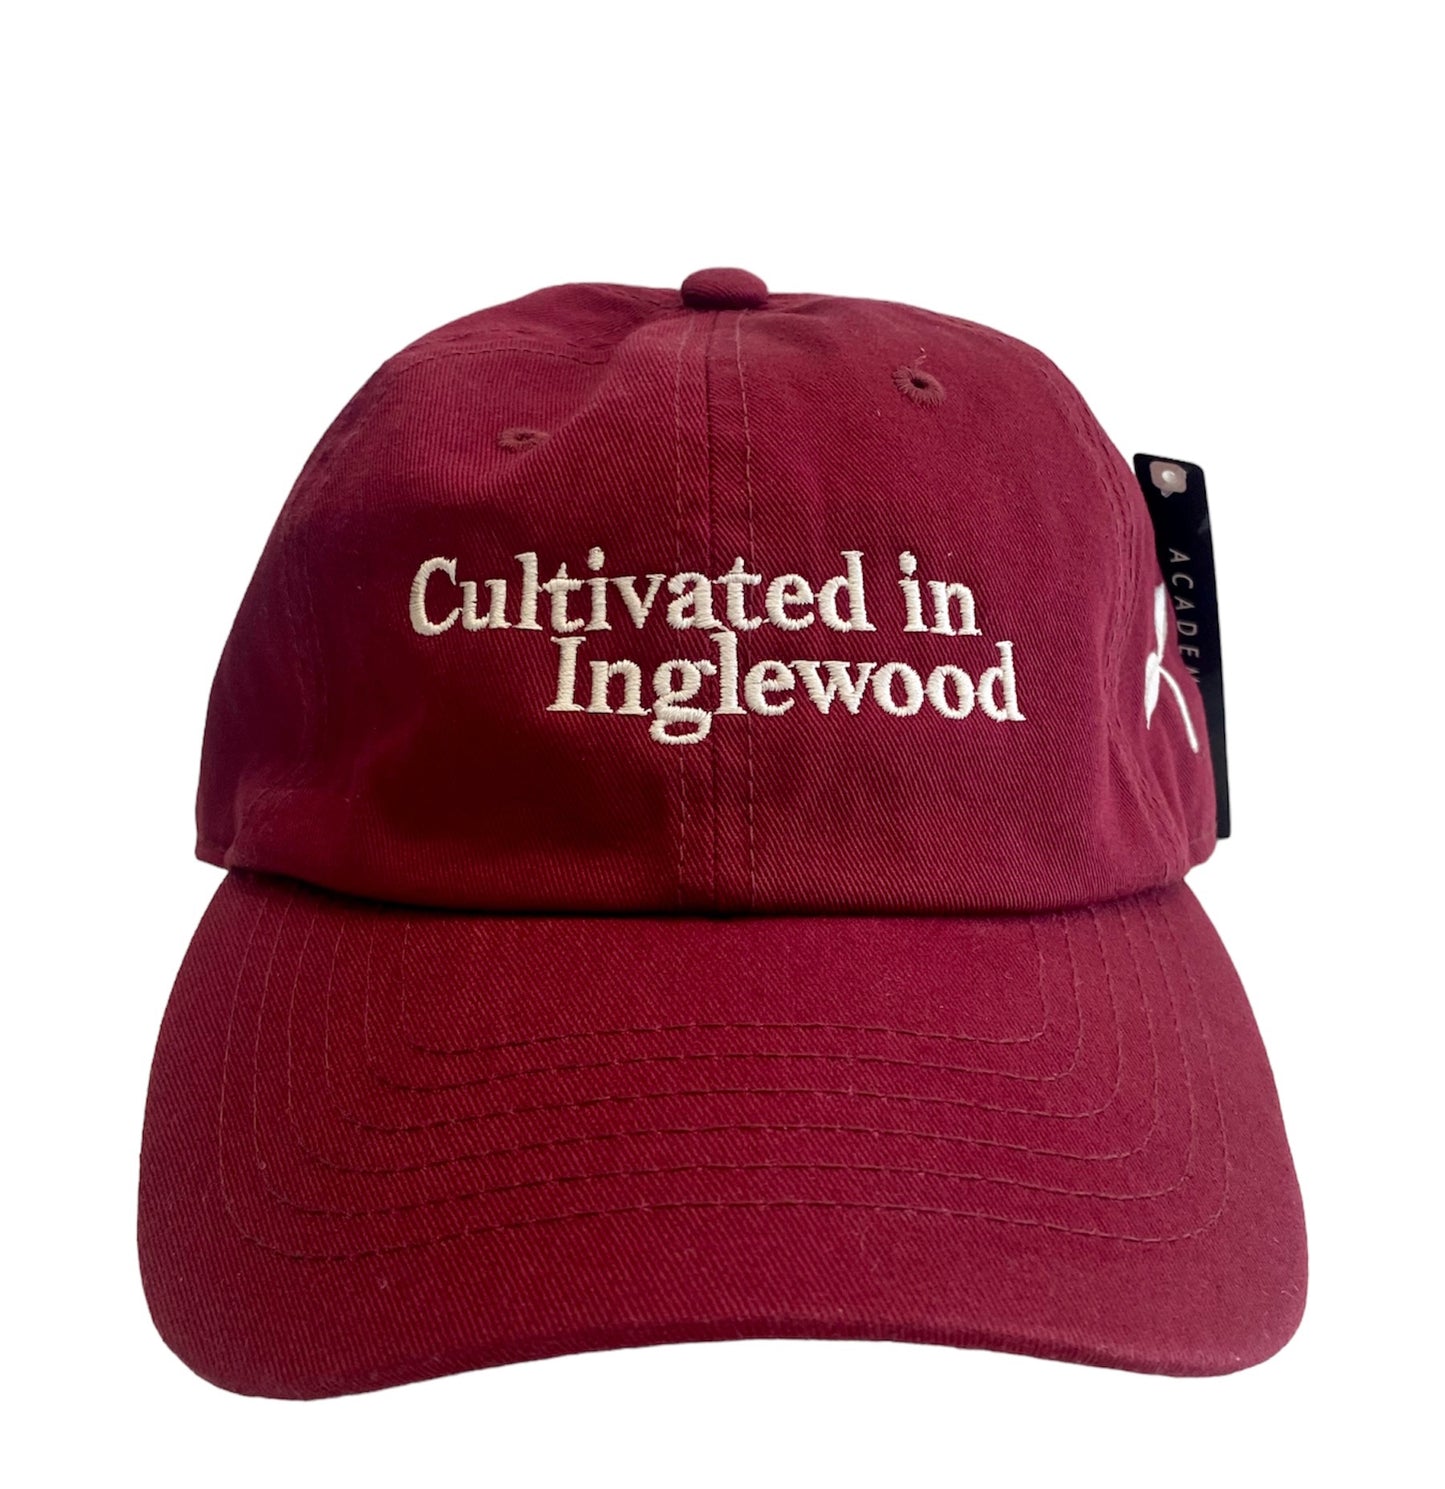 Cultivated in Inglewood Dad Cap - maroon/off white